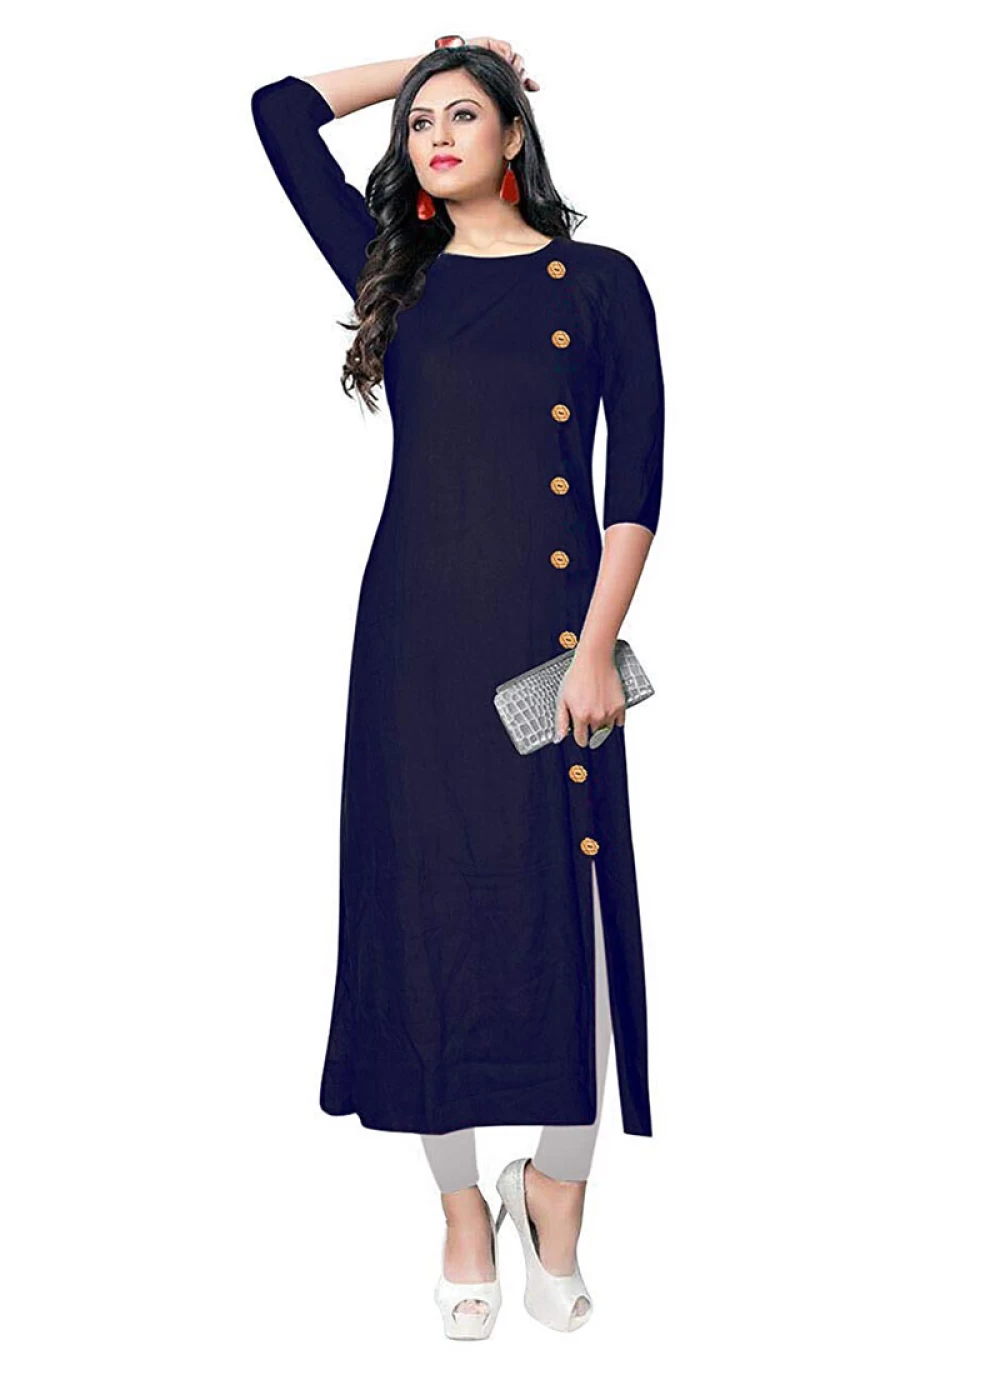 Buy GLAMGIRLS Casual Wear Nylon Net A-Line Kurti for Women-(Blue)-X-Large  at Amazon.in